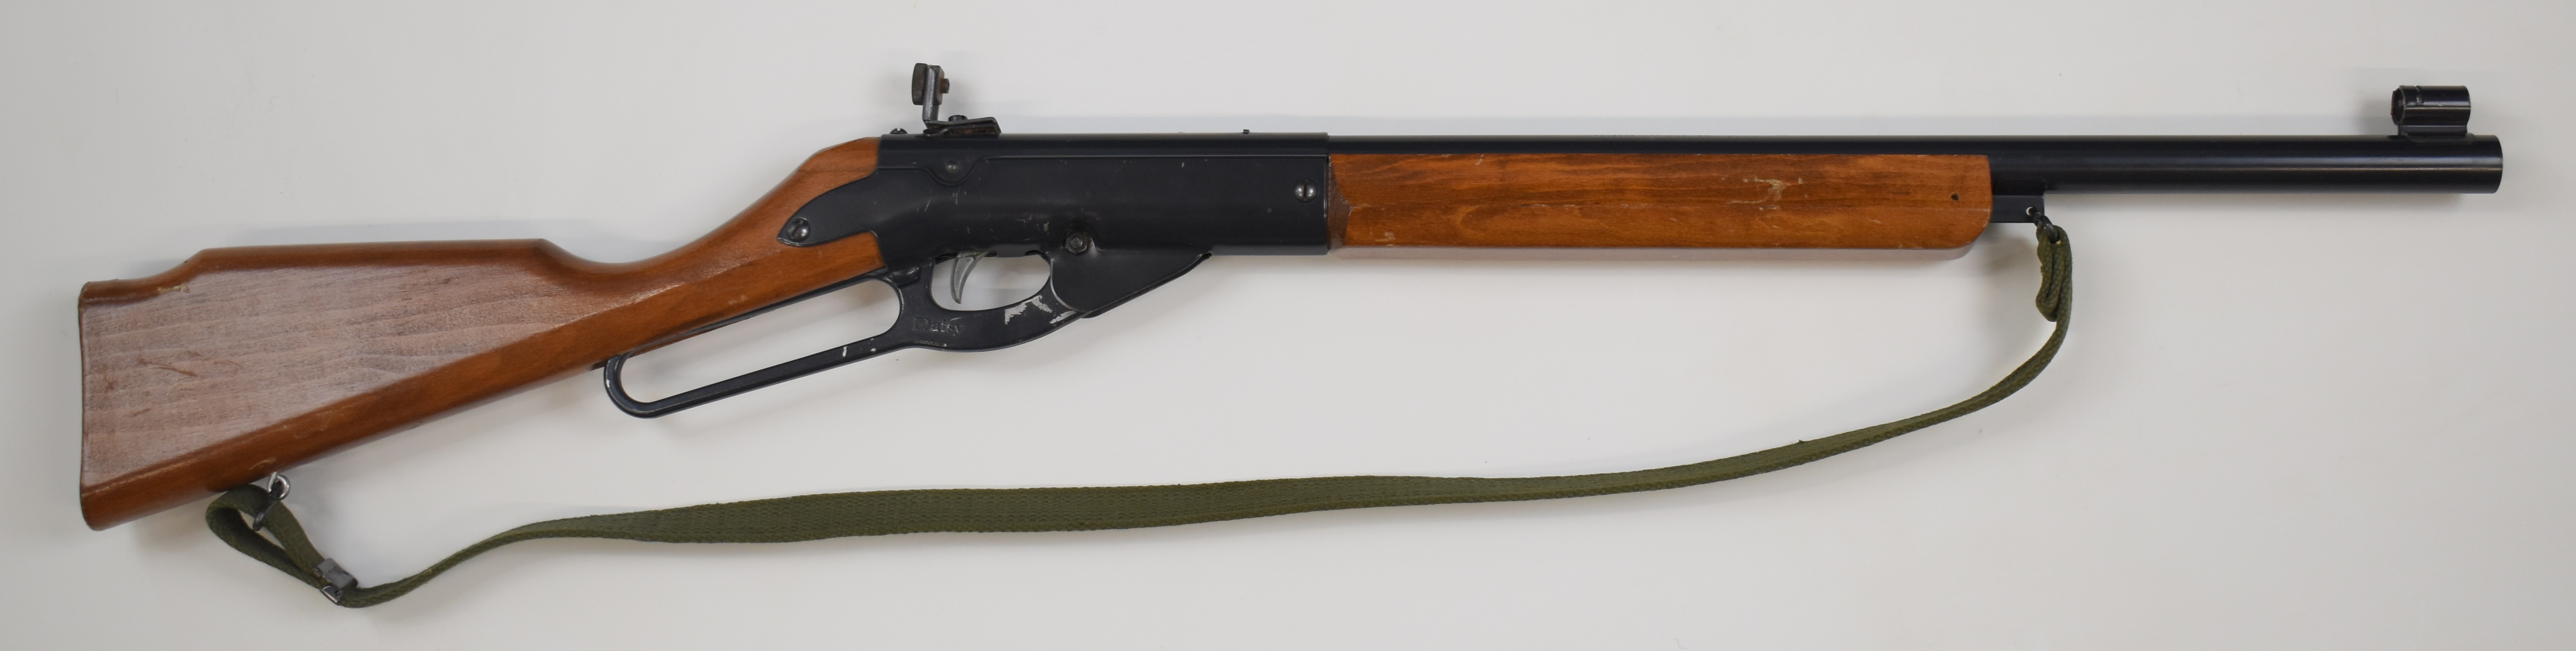 Daisy Model 99 Winchester style underlever-action air rifle with wooden grip and forend, canvas - Image 2 of 10